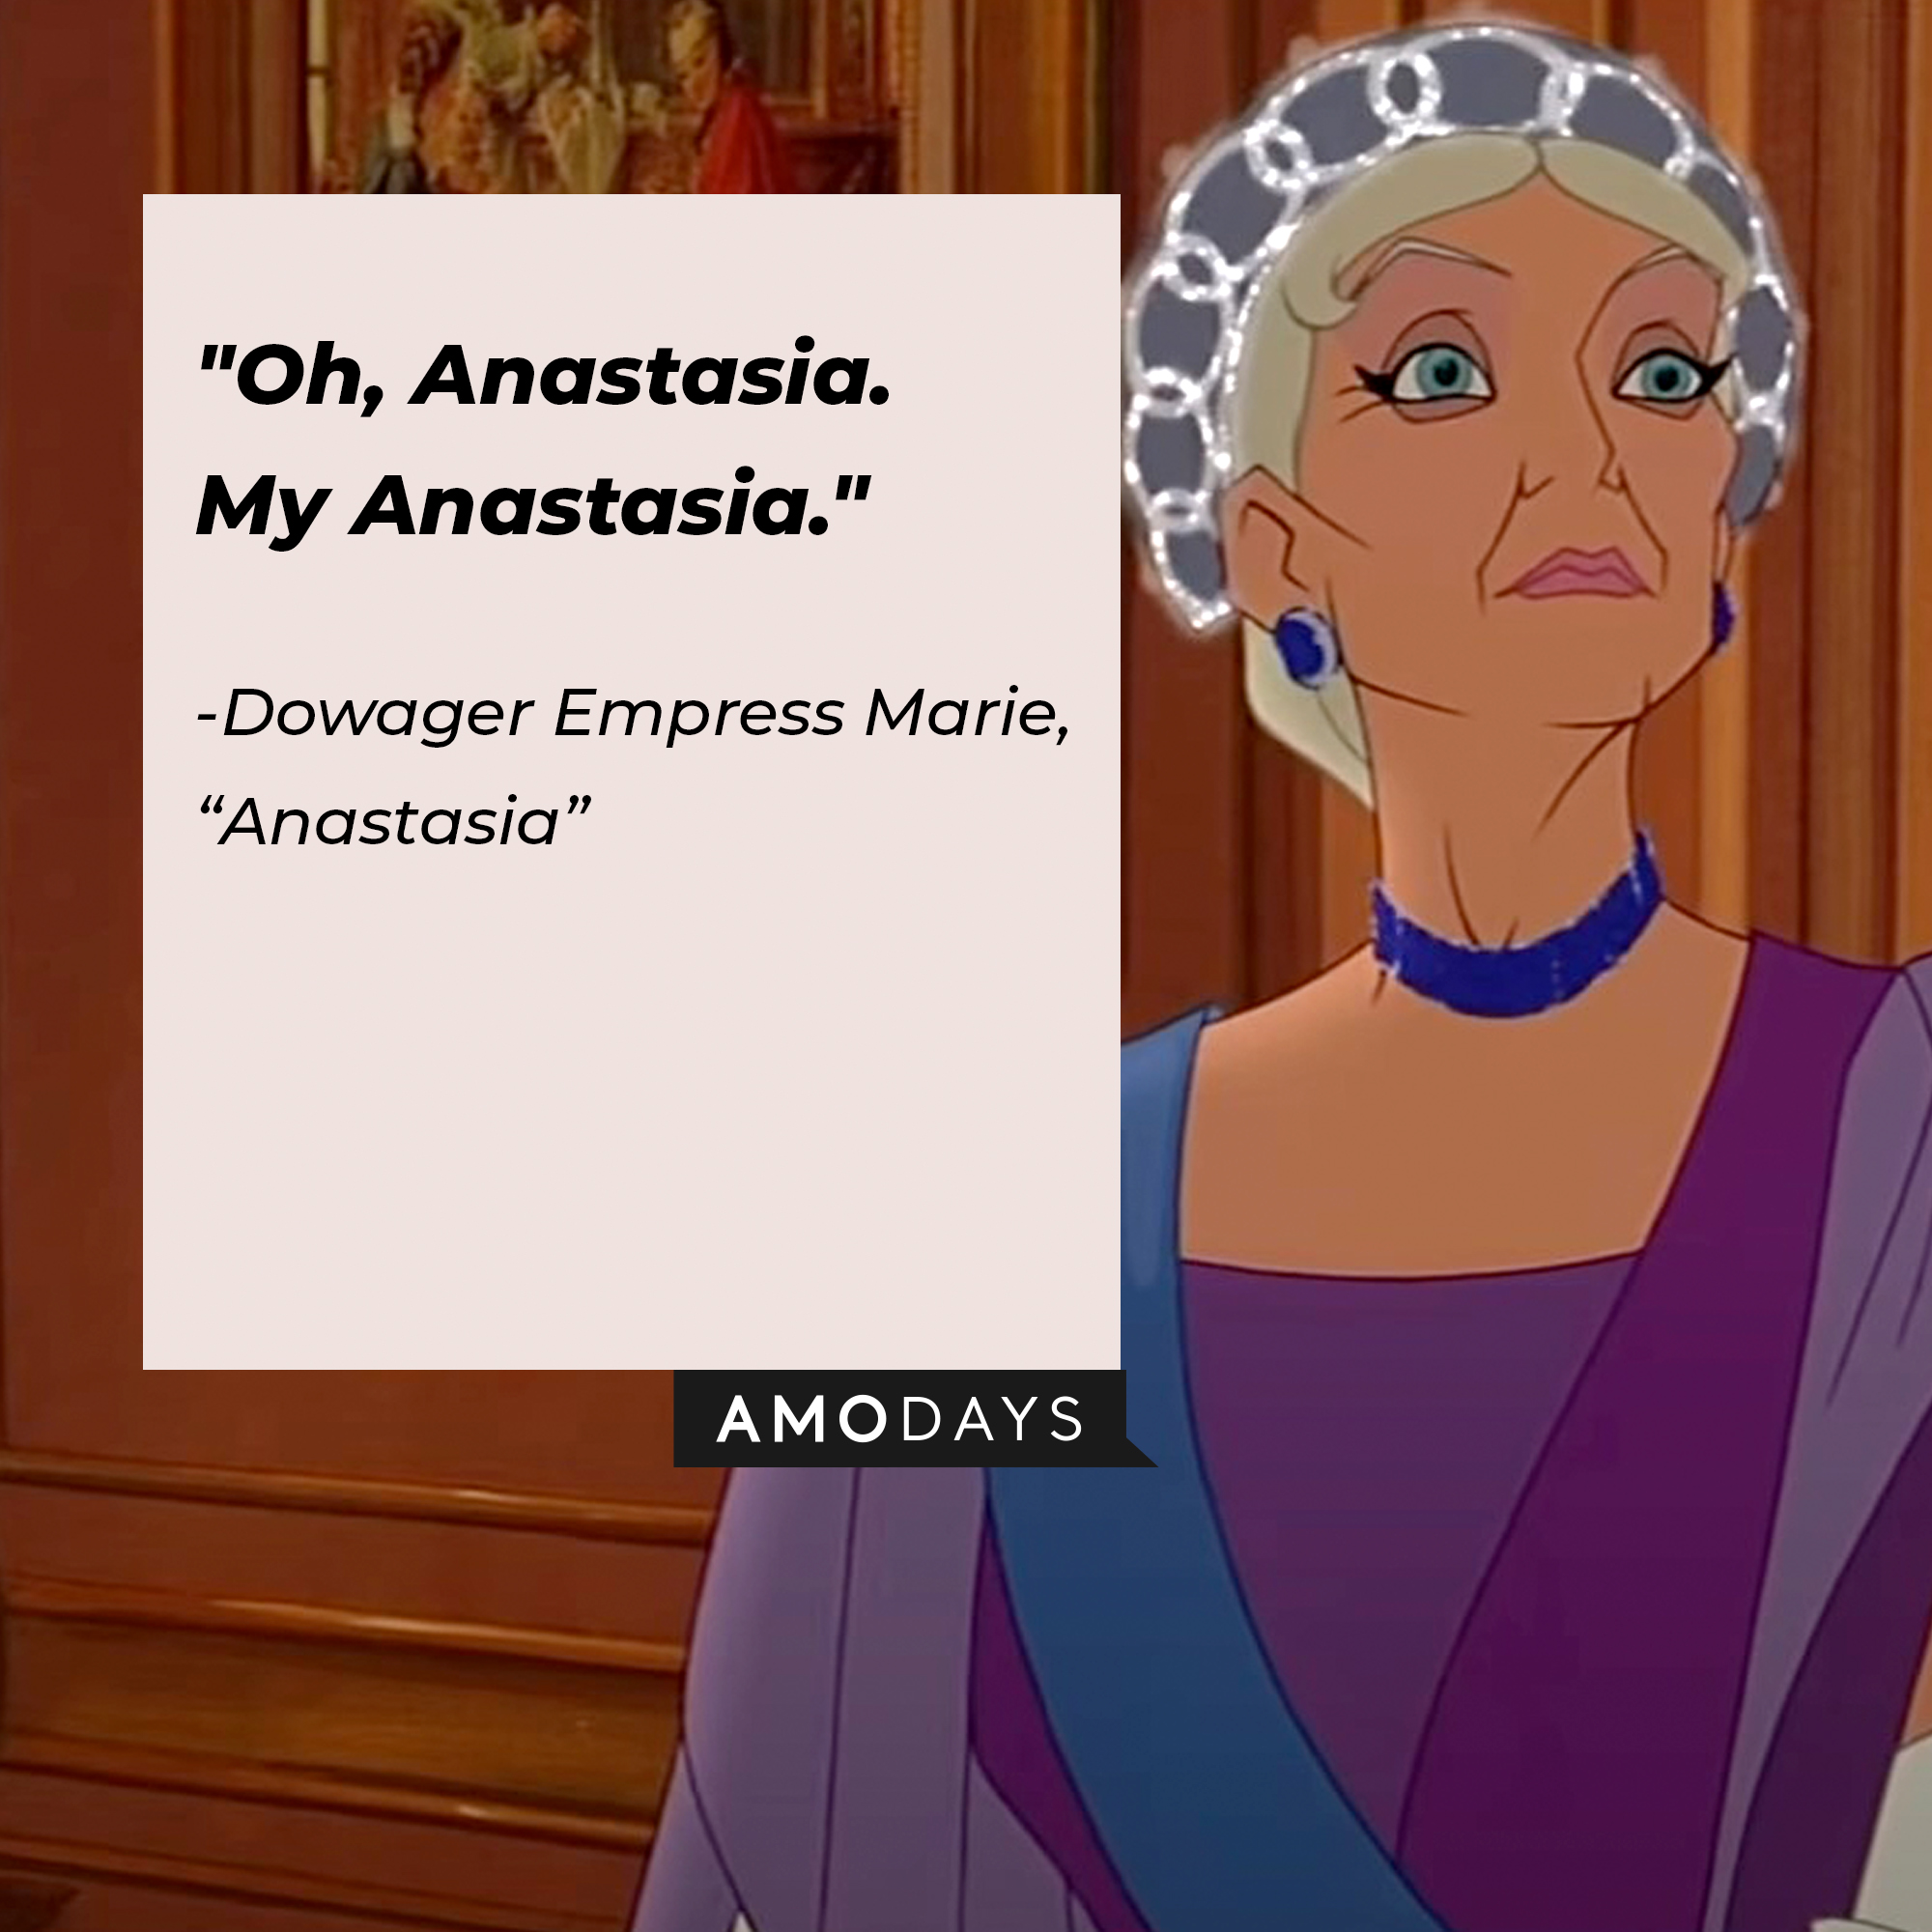 Image of Dowager Empress Marie with the quote: "Oh, Anastasia. My Anastasia." | Source: Youtube.com/20thCenturyStudios